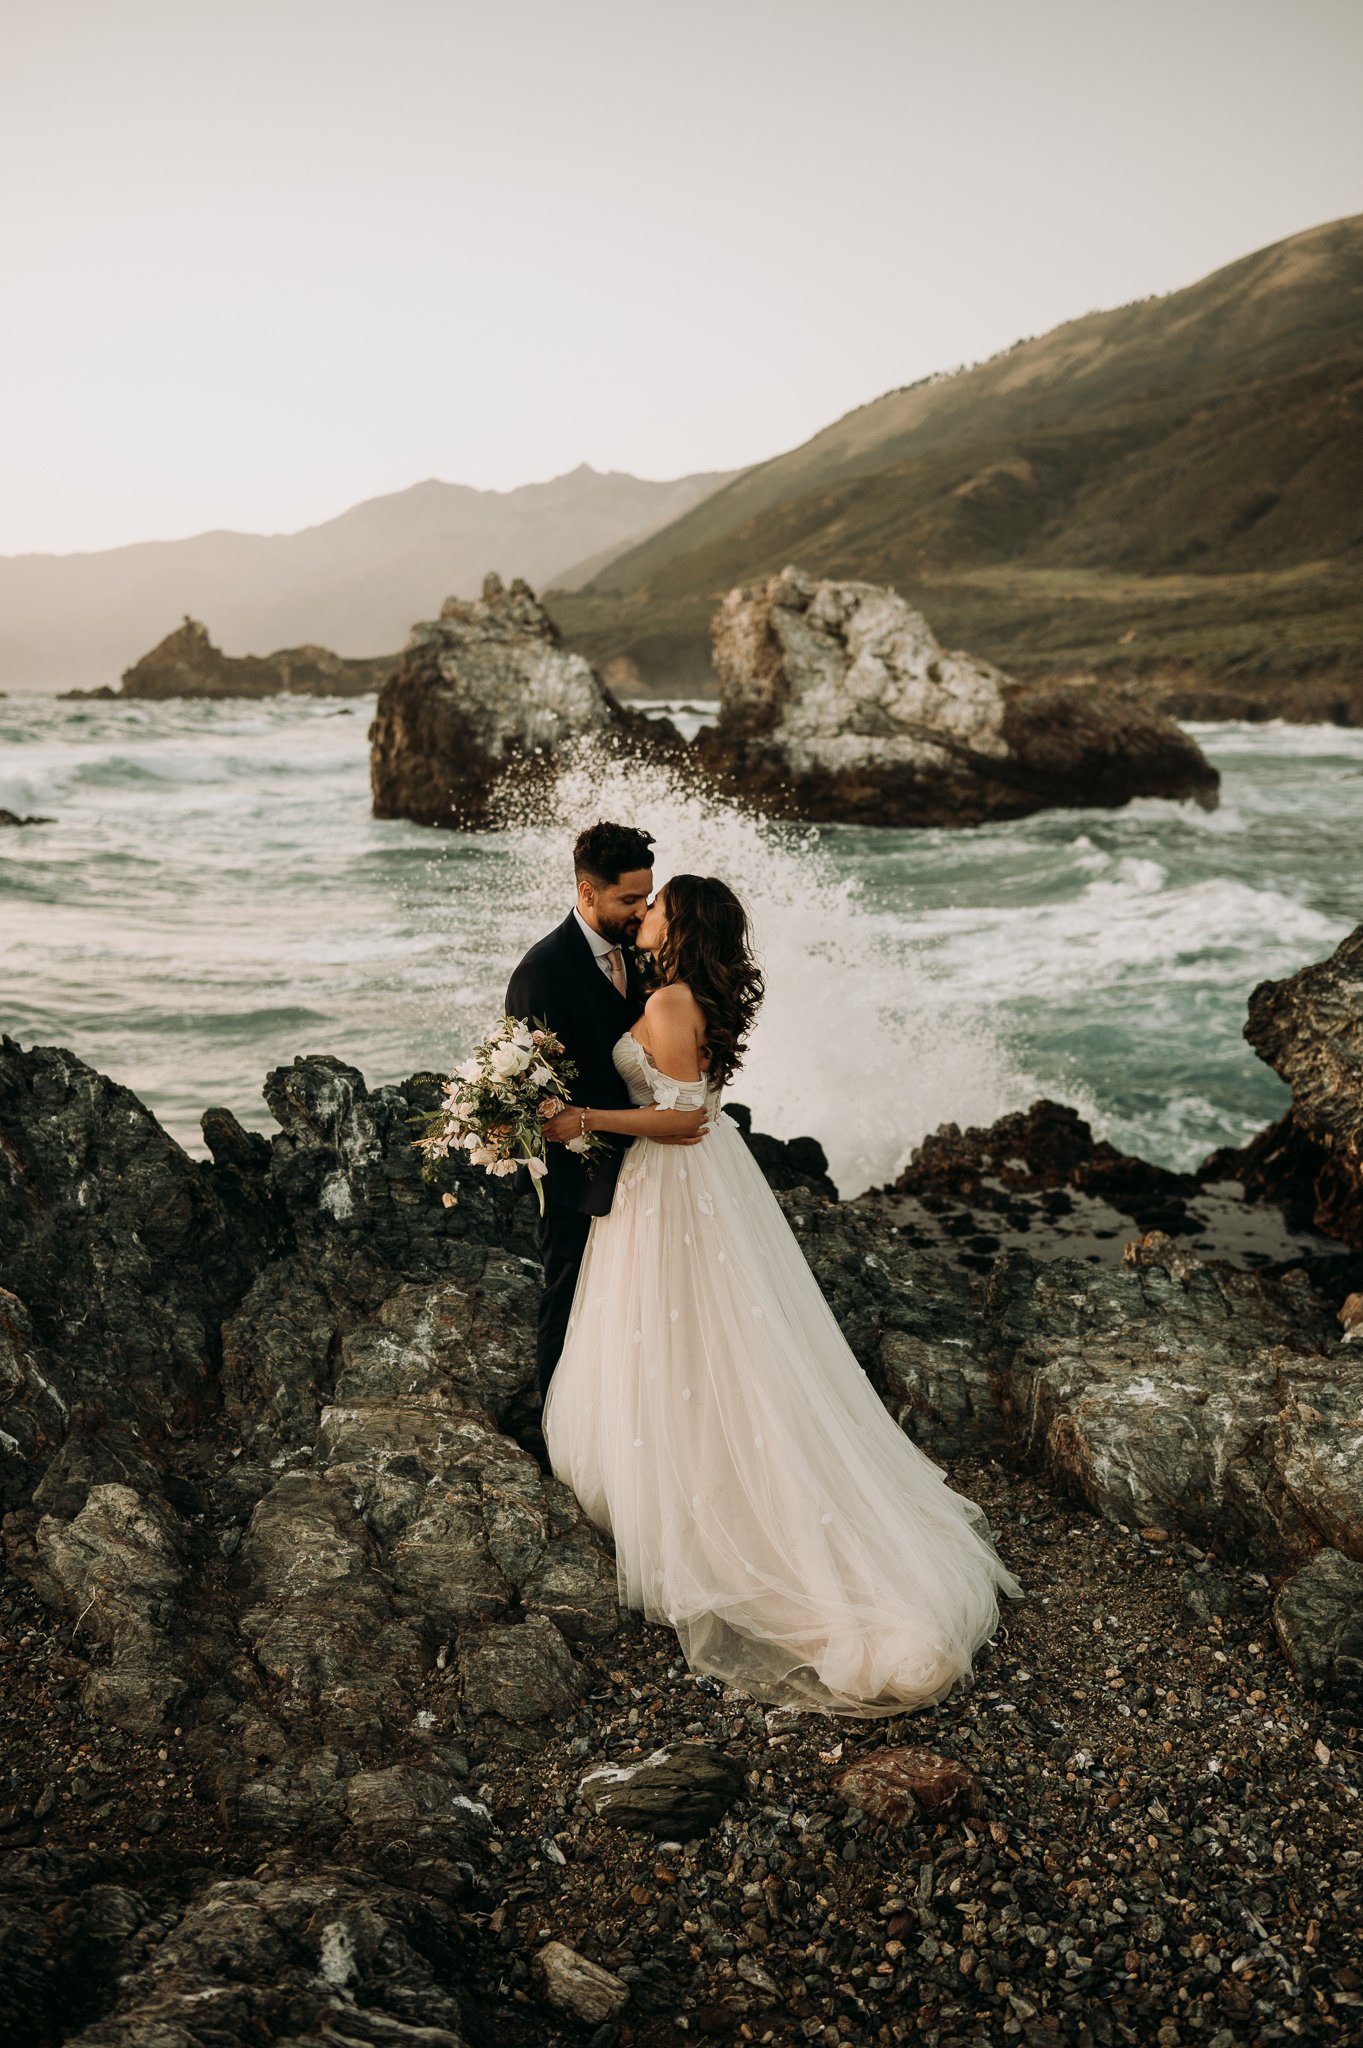 Newly married couple in wedding attire sharing a intimate moment on cliff Big Sur